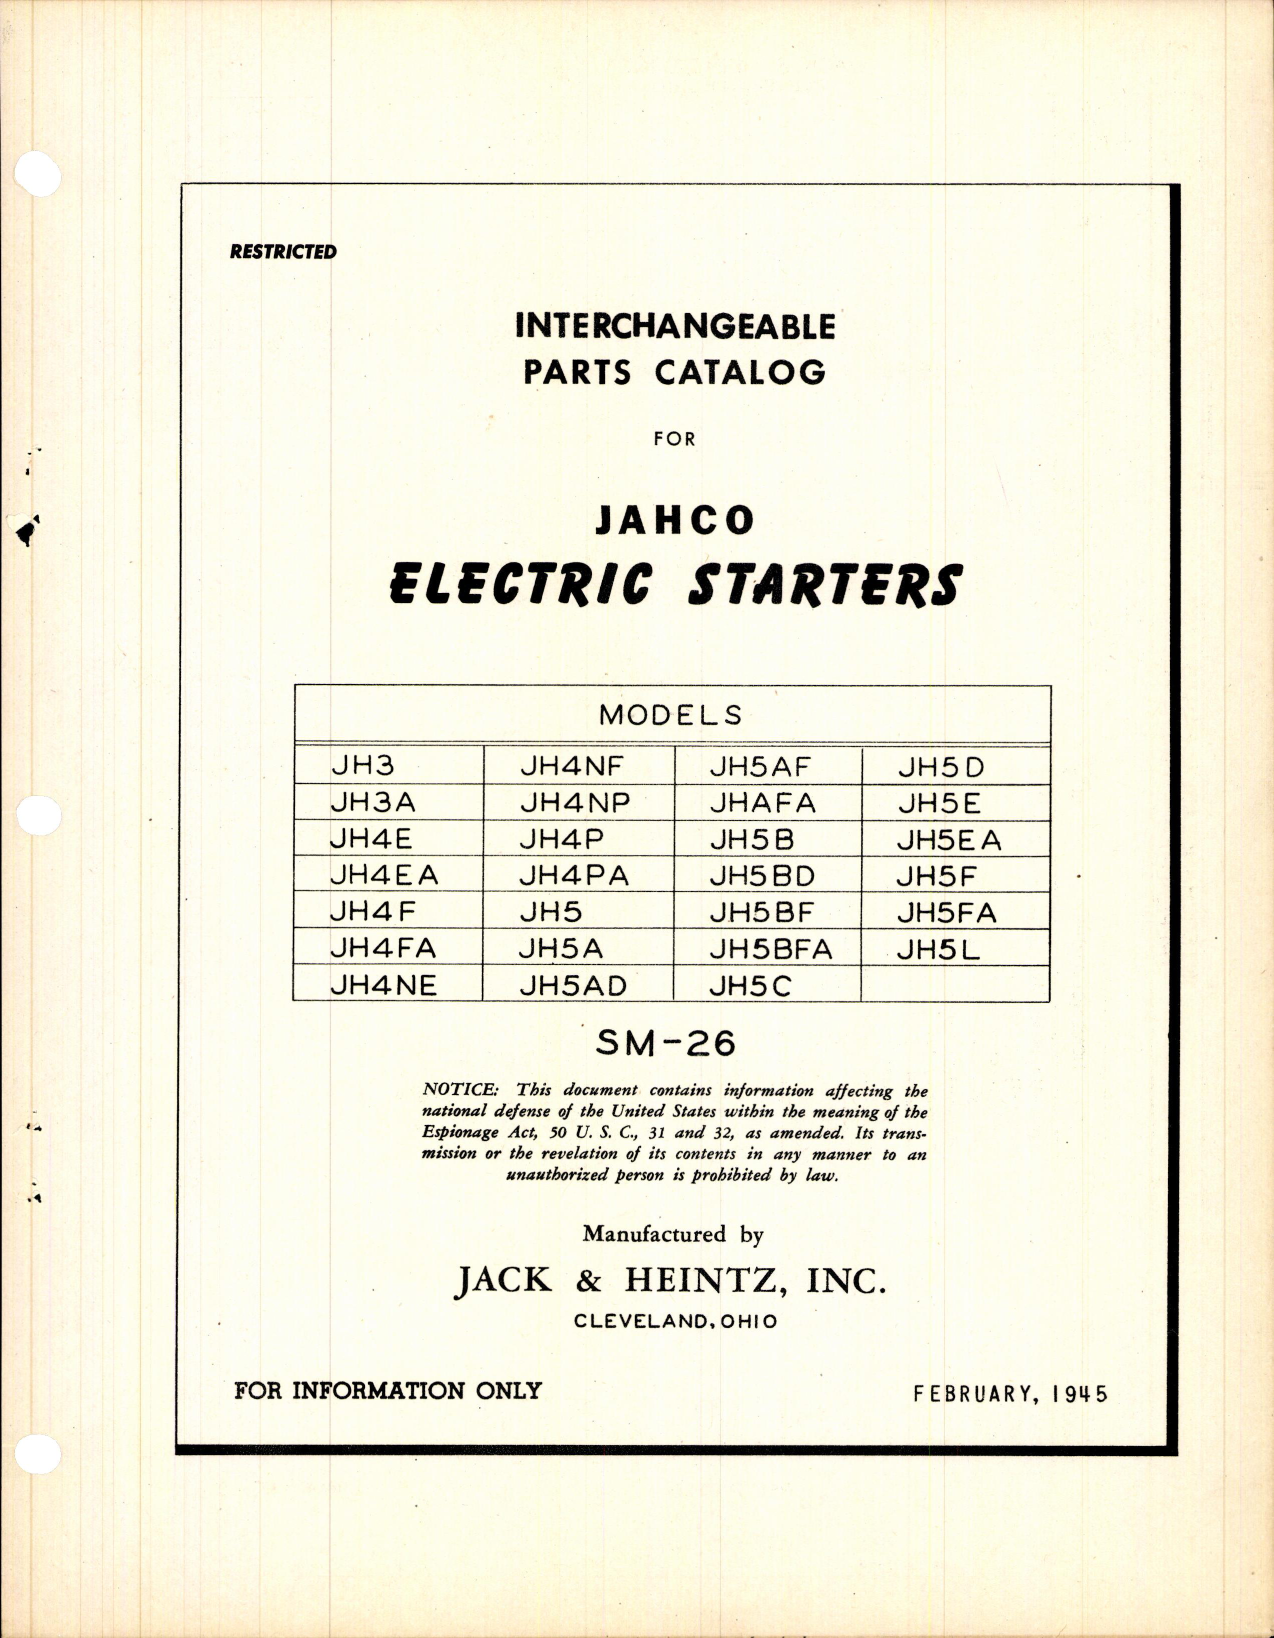 Sample page 3 from AirCorps Library document: Interchangeable Parts Catalog for Jahco Electric Starters